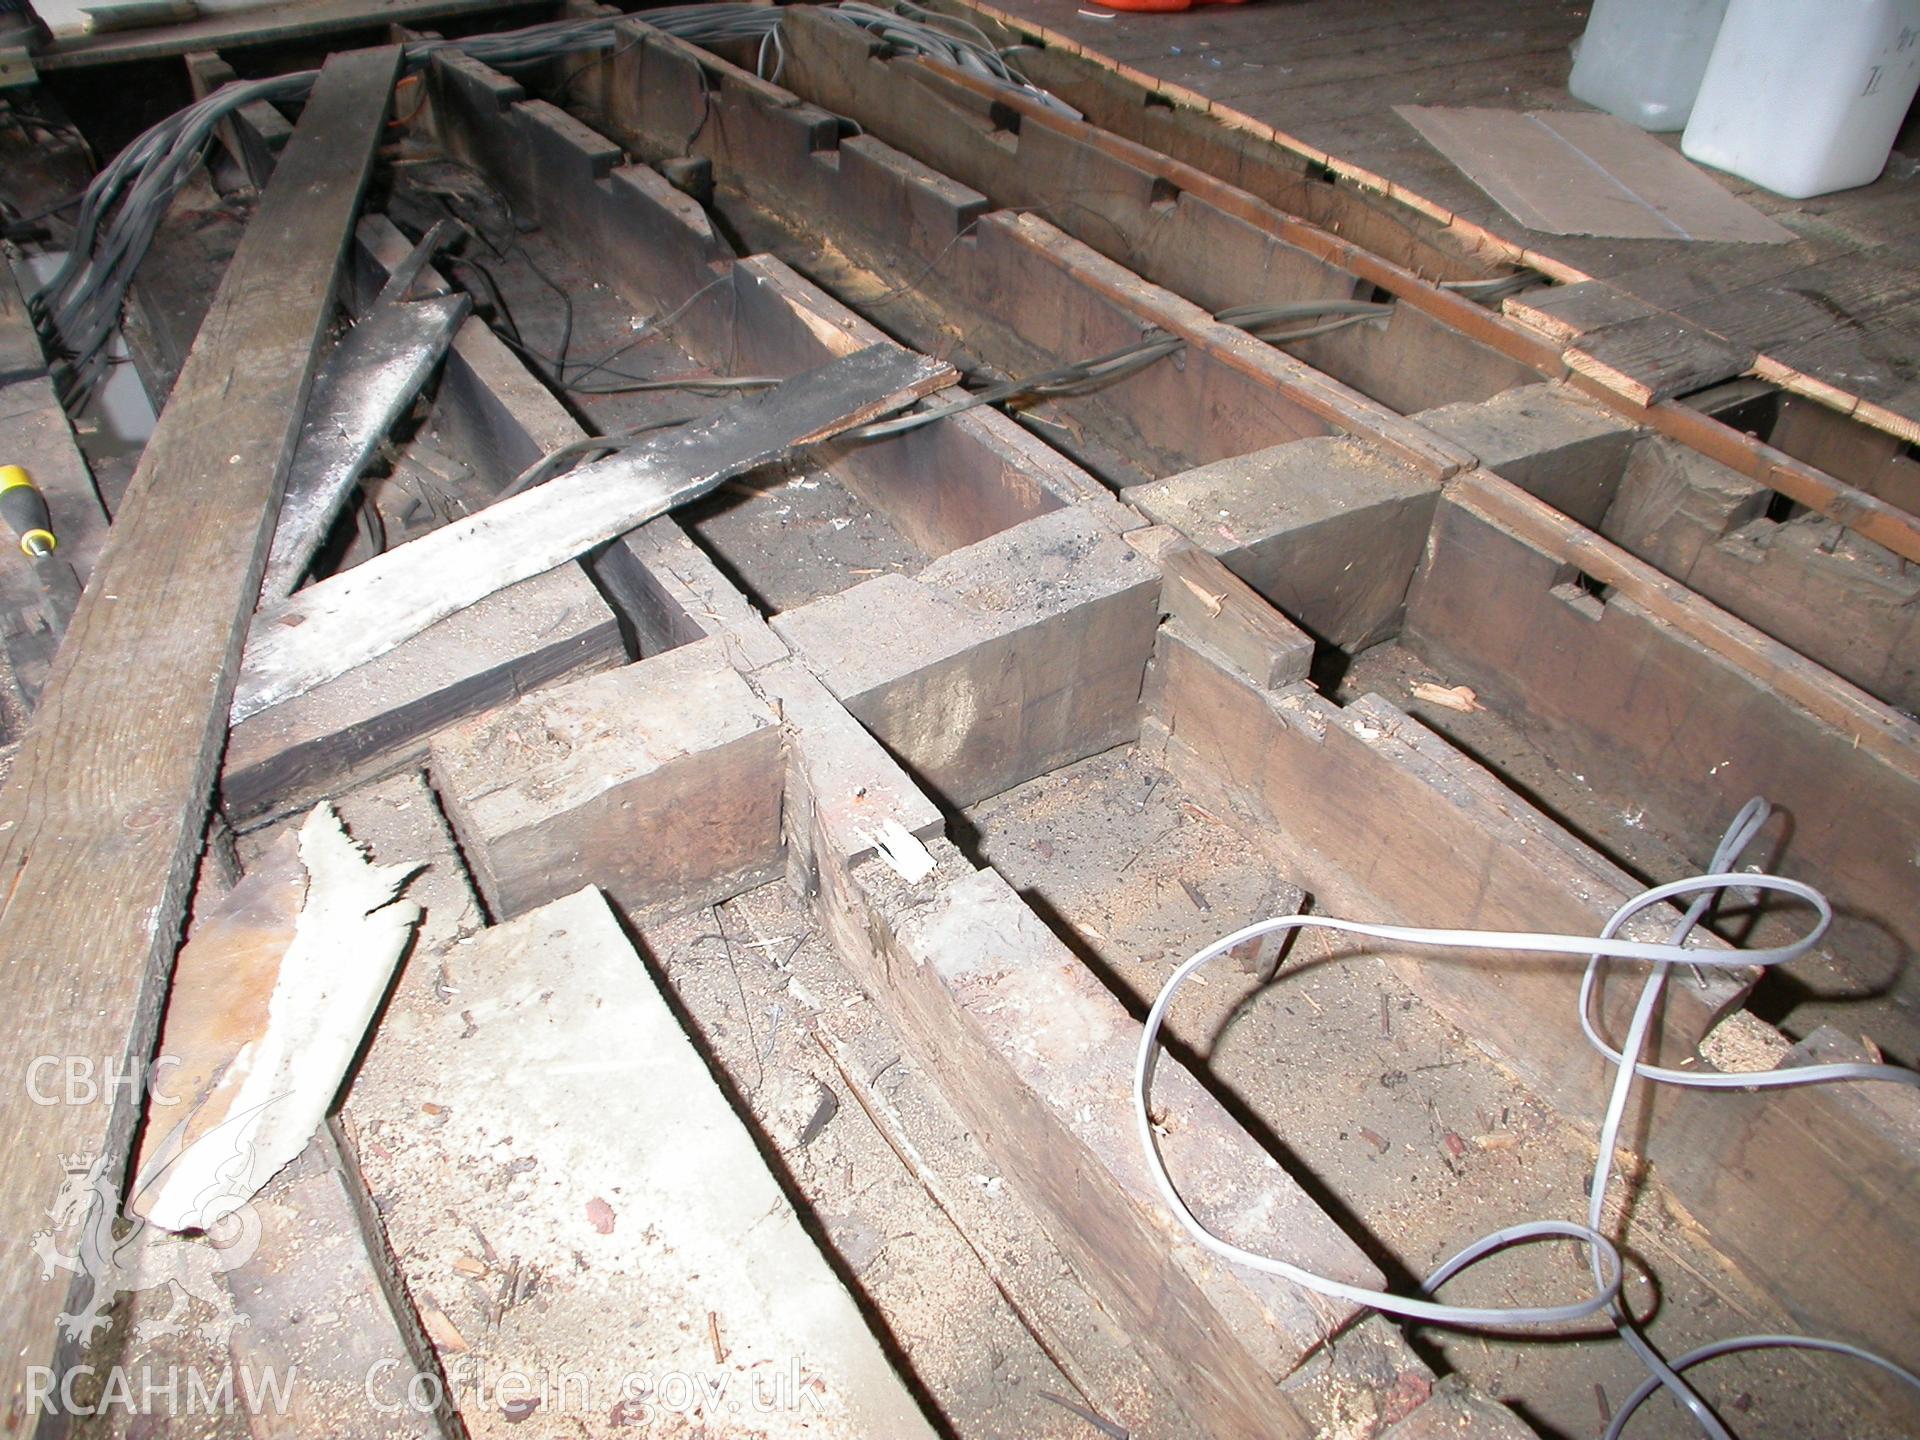 King's Head interior, first-floor joists to front right.